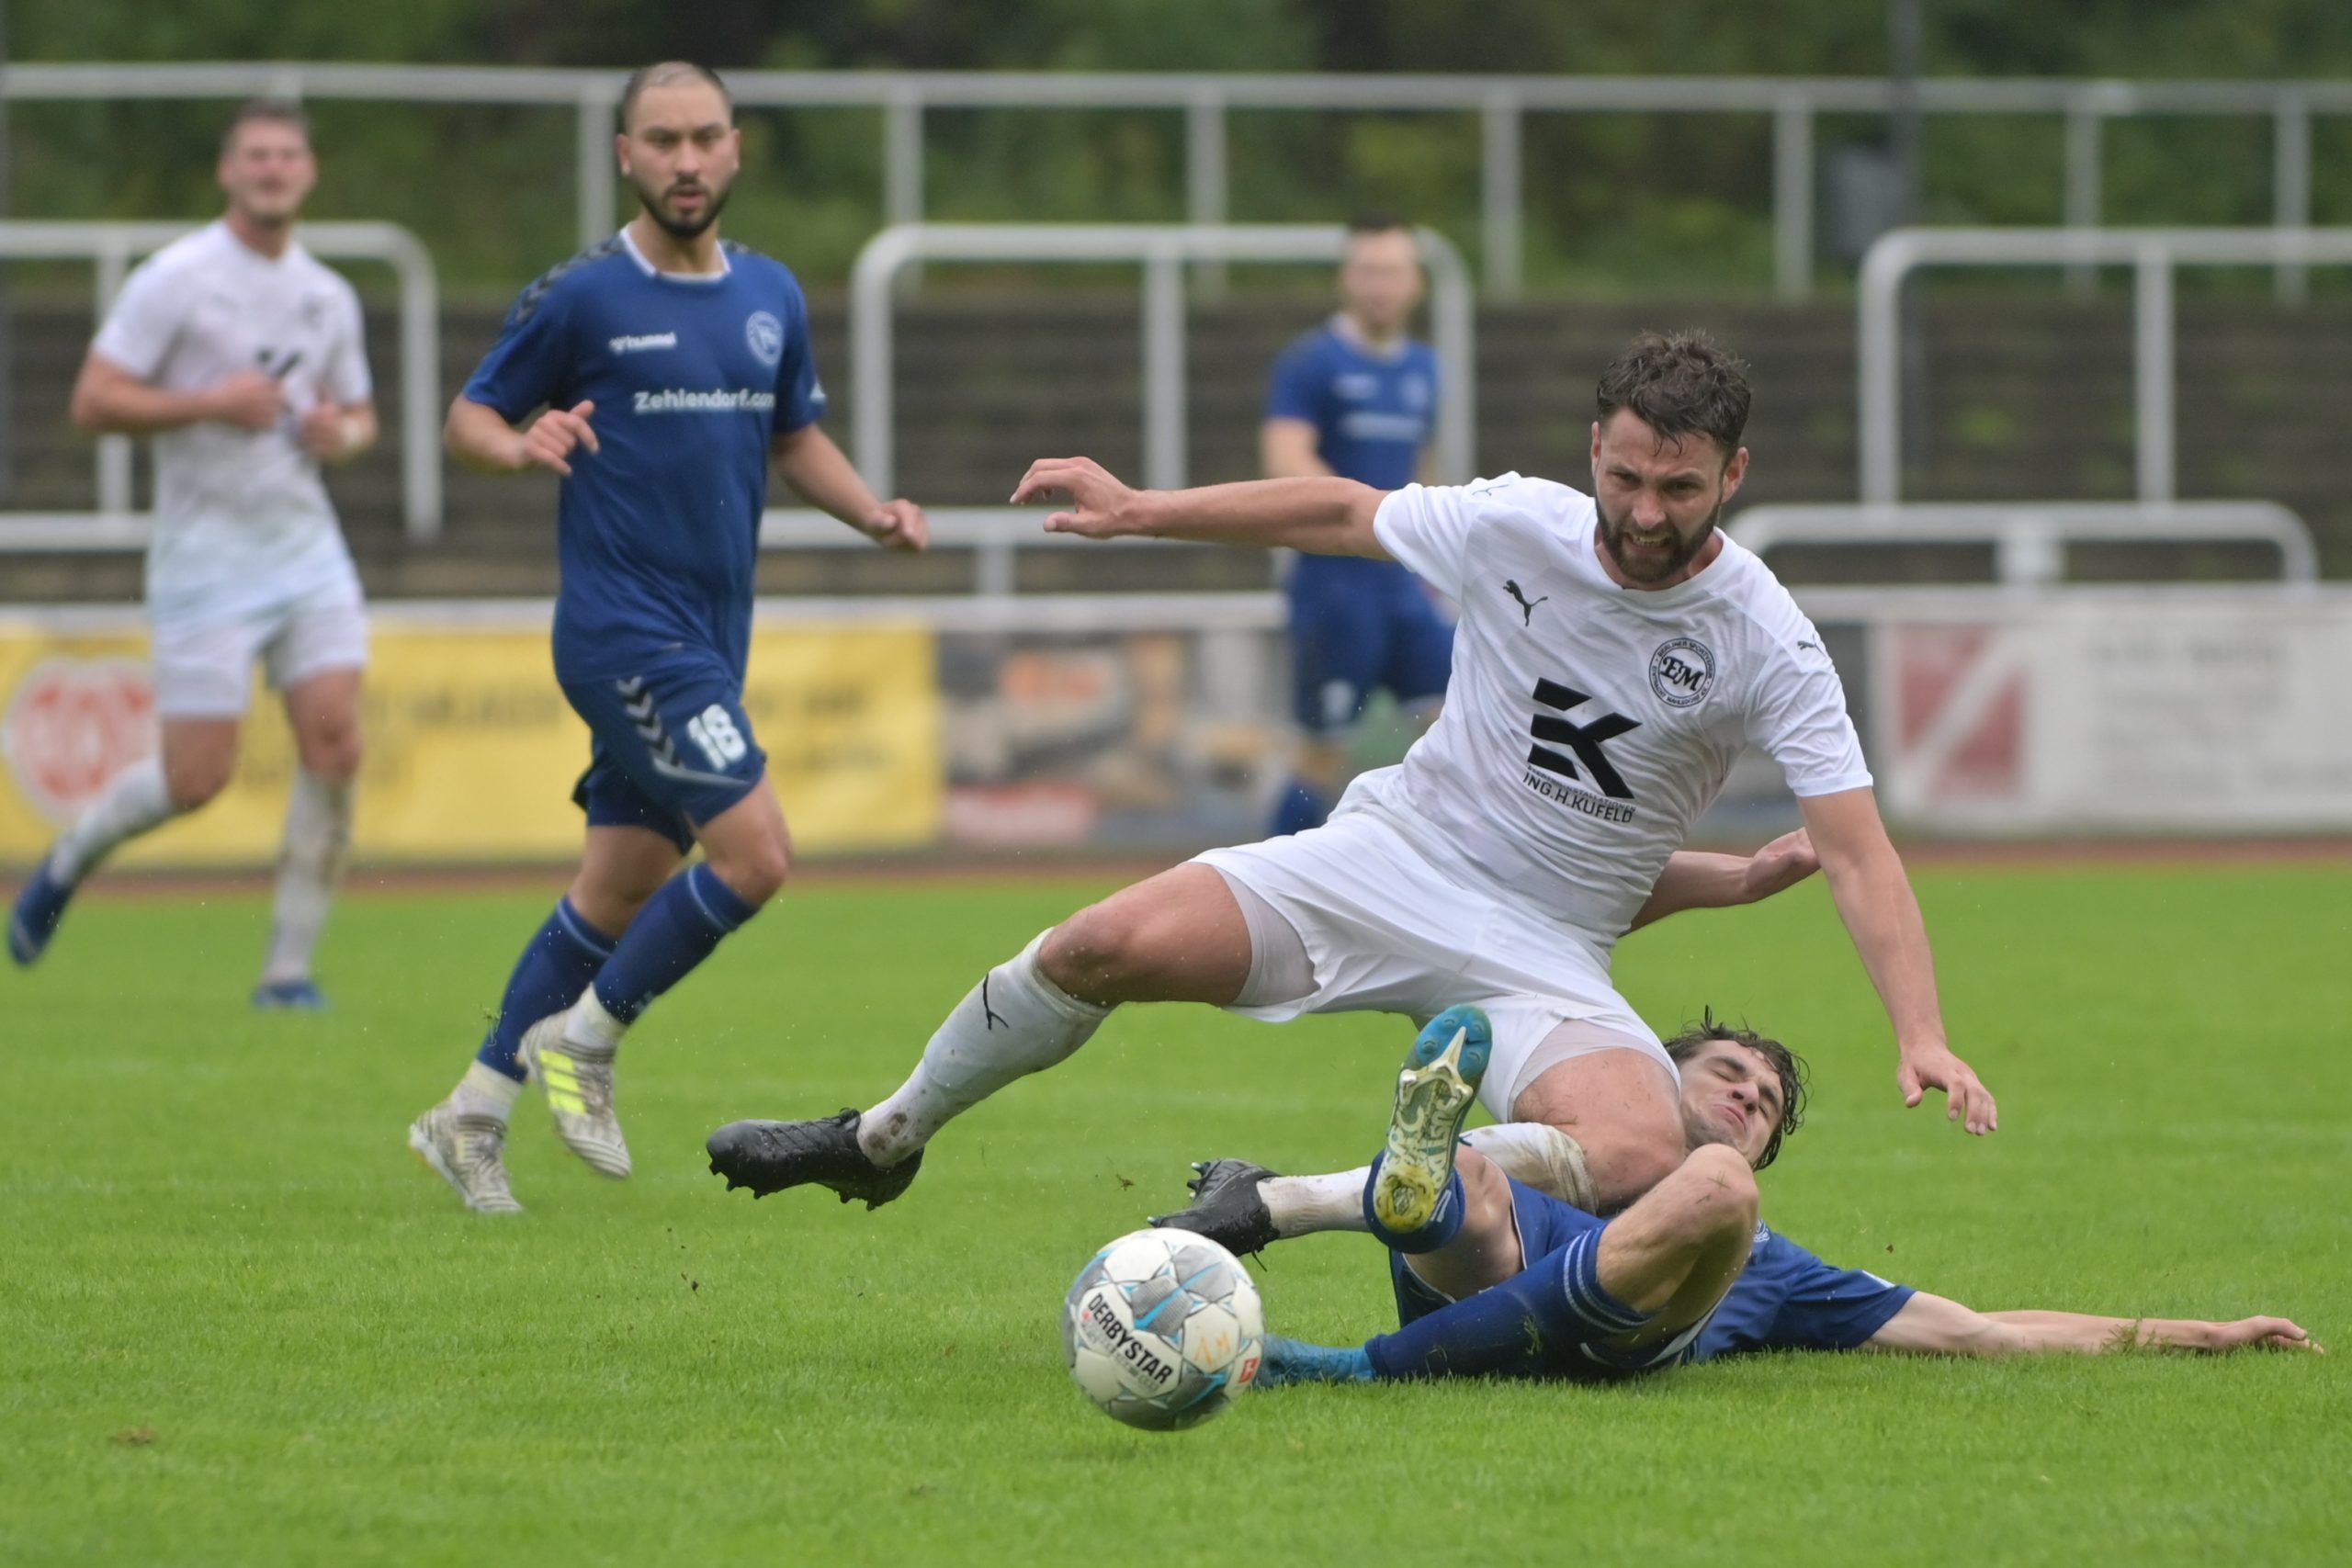 Read more about the article AOK-Pokal: Mahlsdorf reist wieder nach Reinickendorf